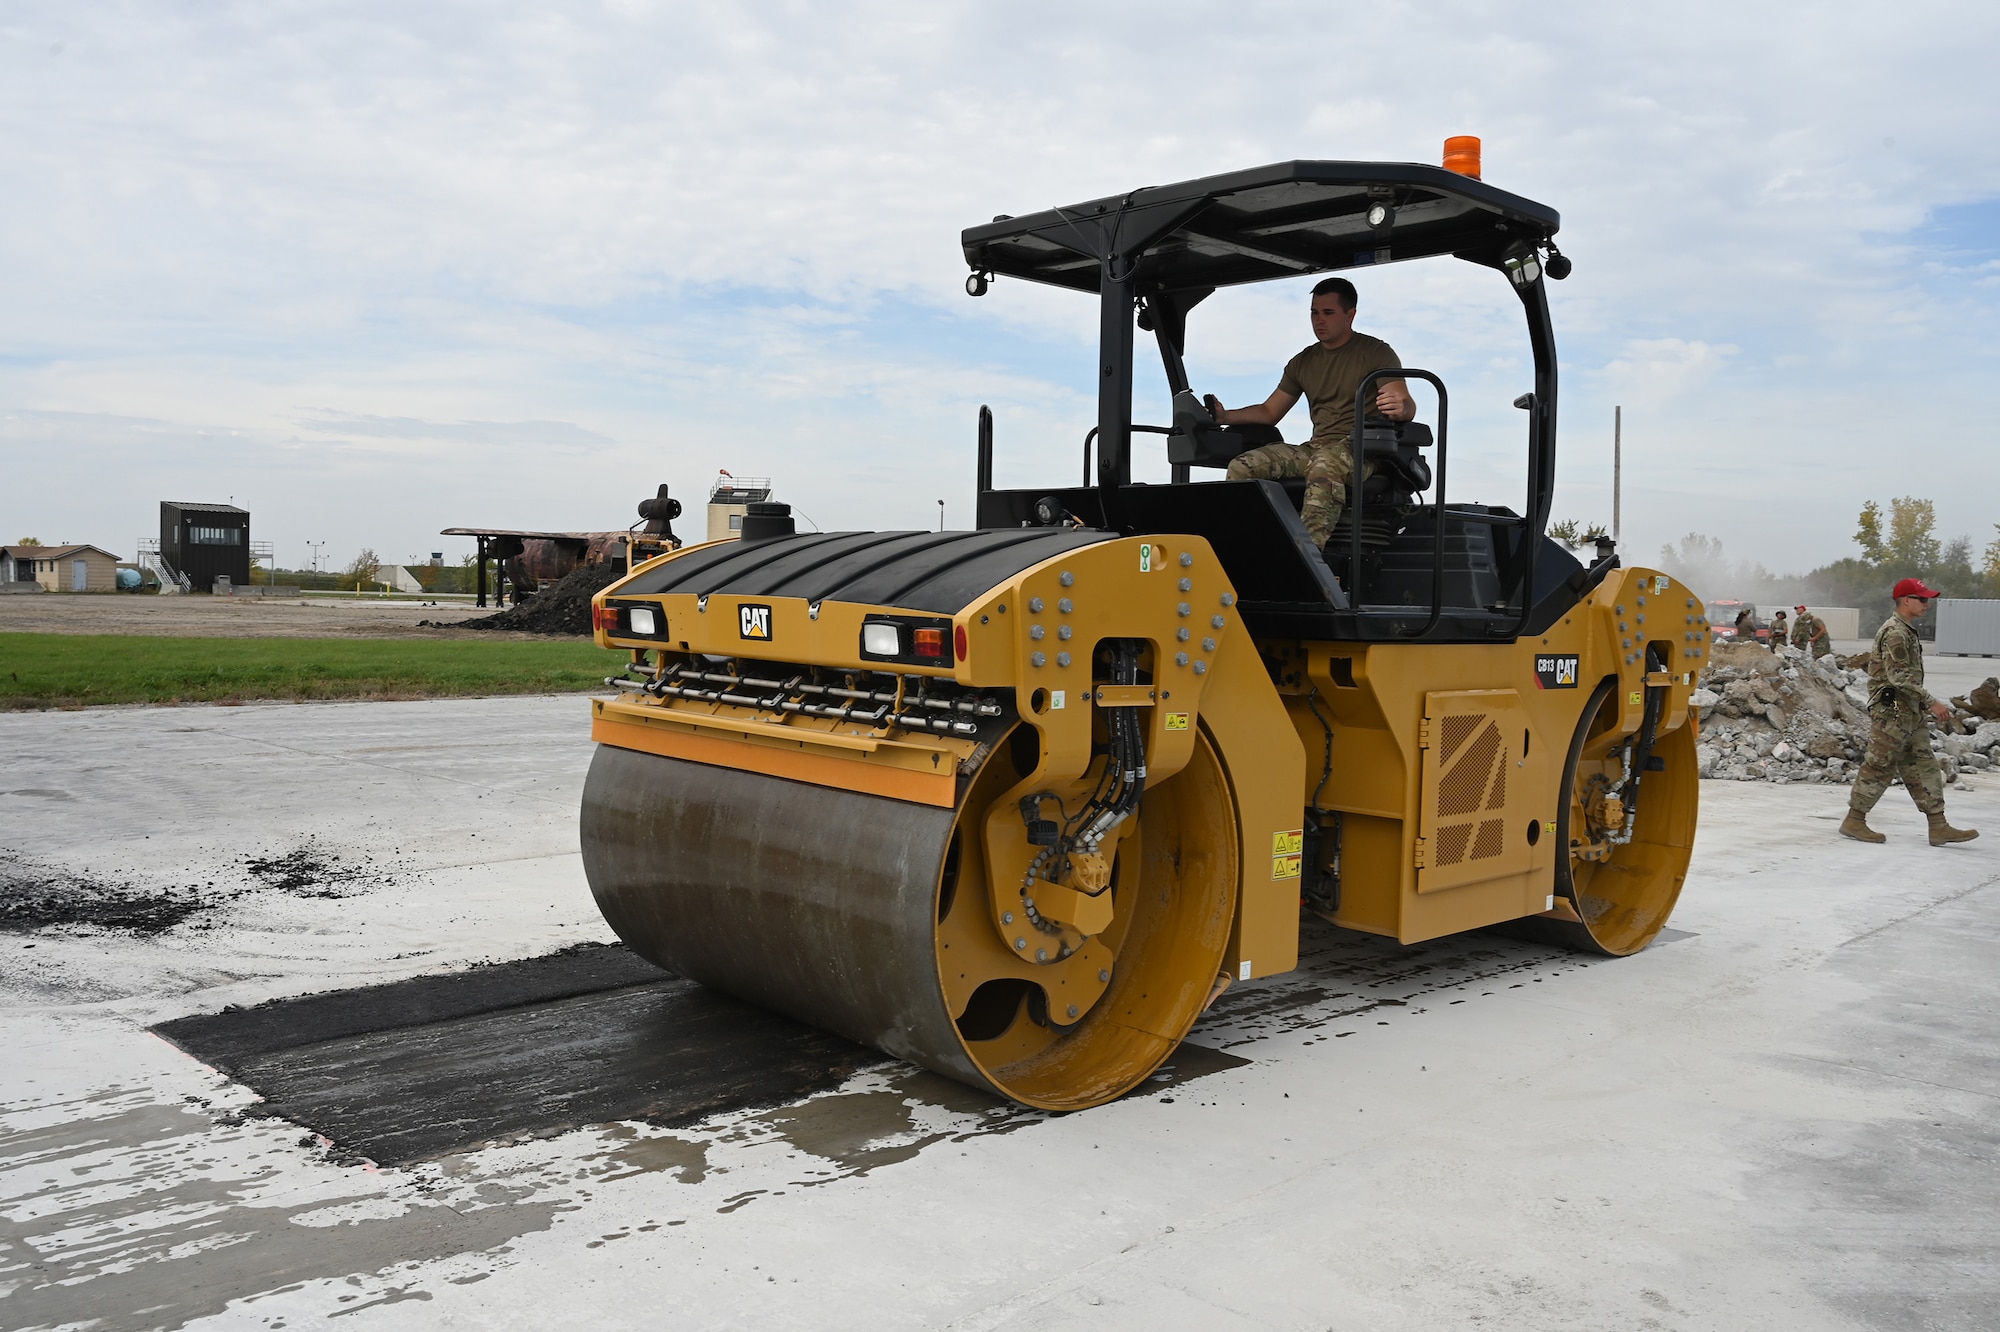 A military member operates an asphalt compactor as he levels an asphalt patch on a concrete training runway at the North Dakota Air National Guard Regional Training Site, Fargo, N.D., Sept, 29, 2021.